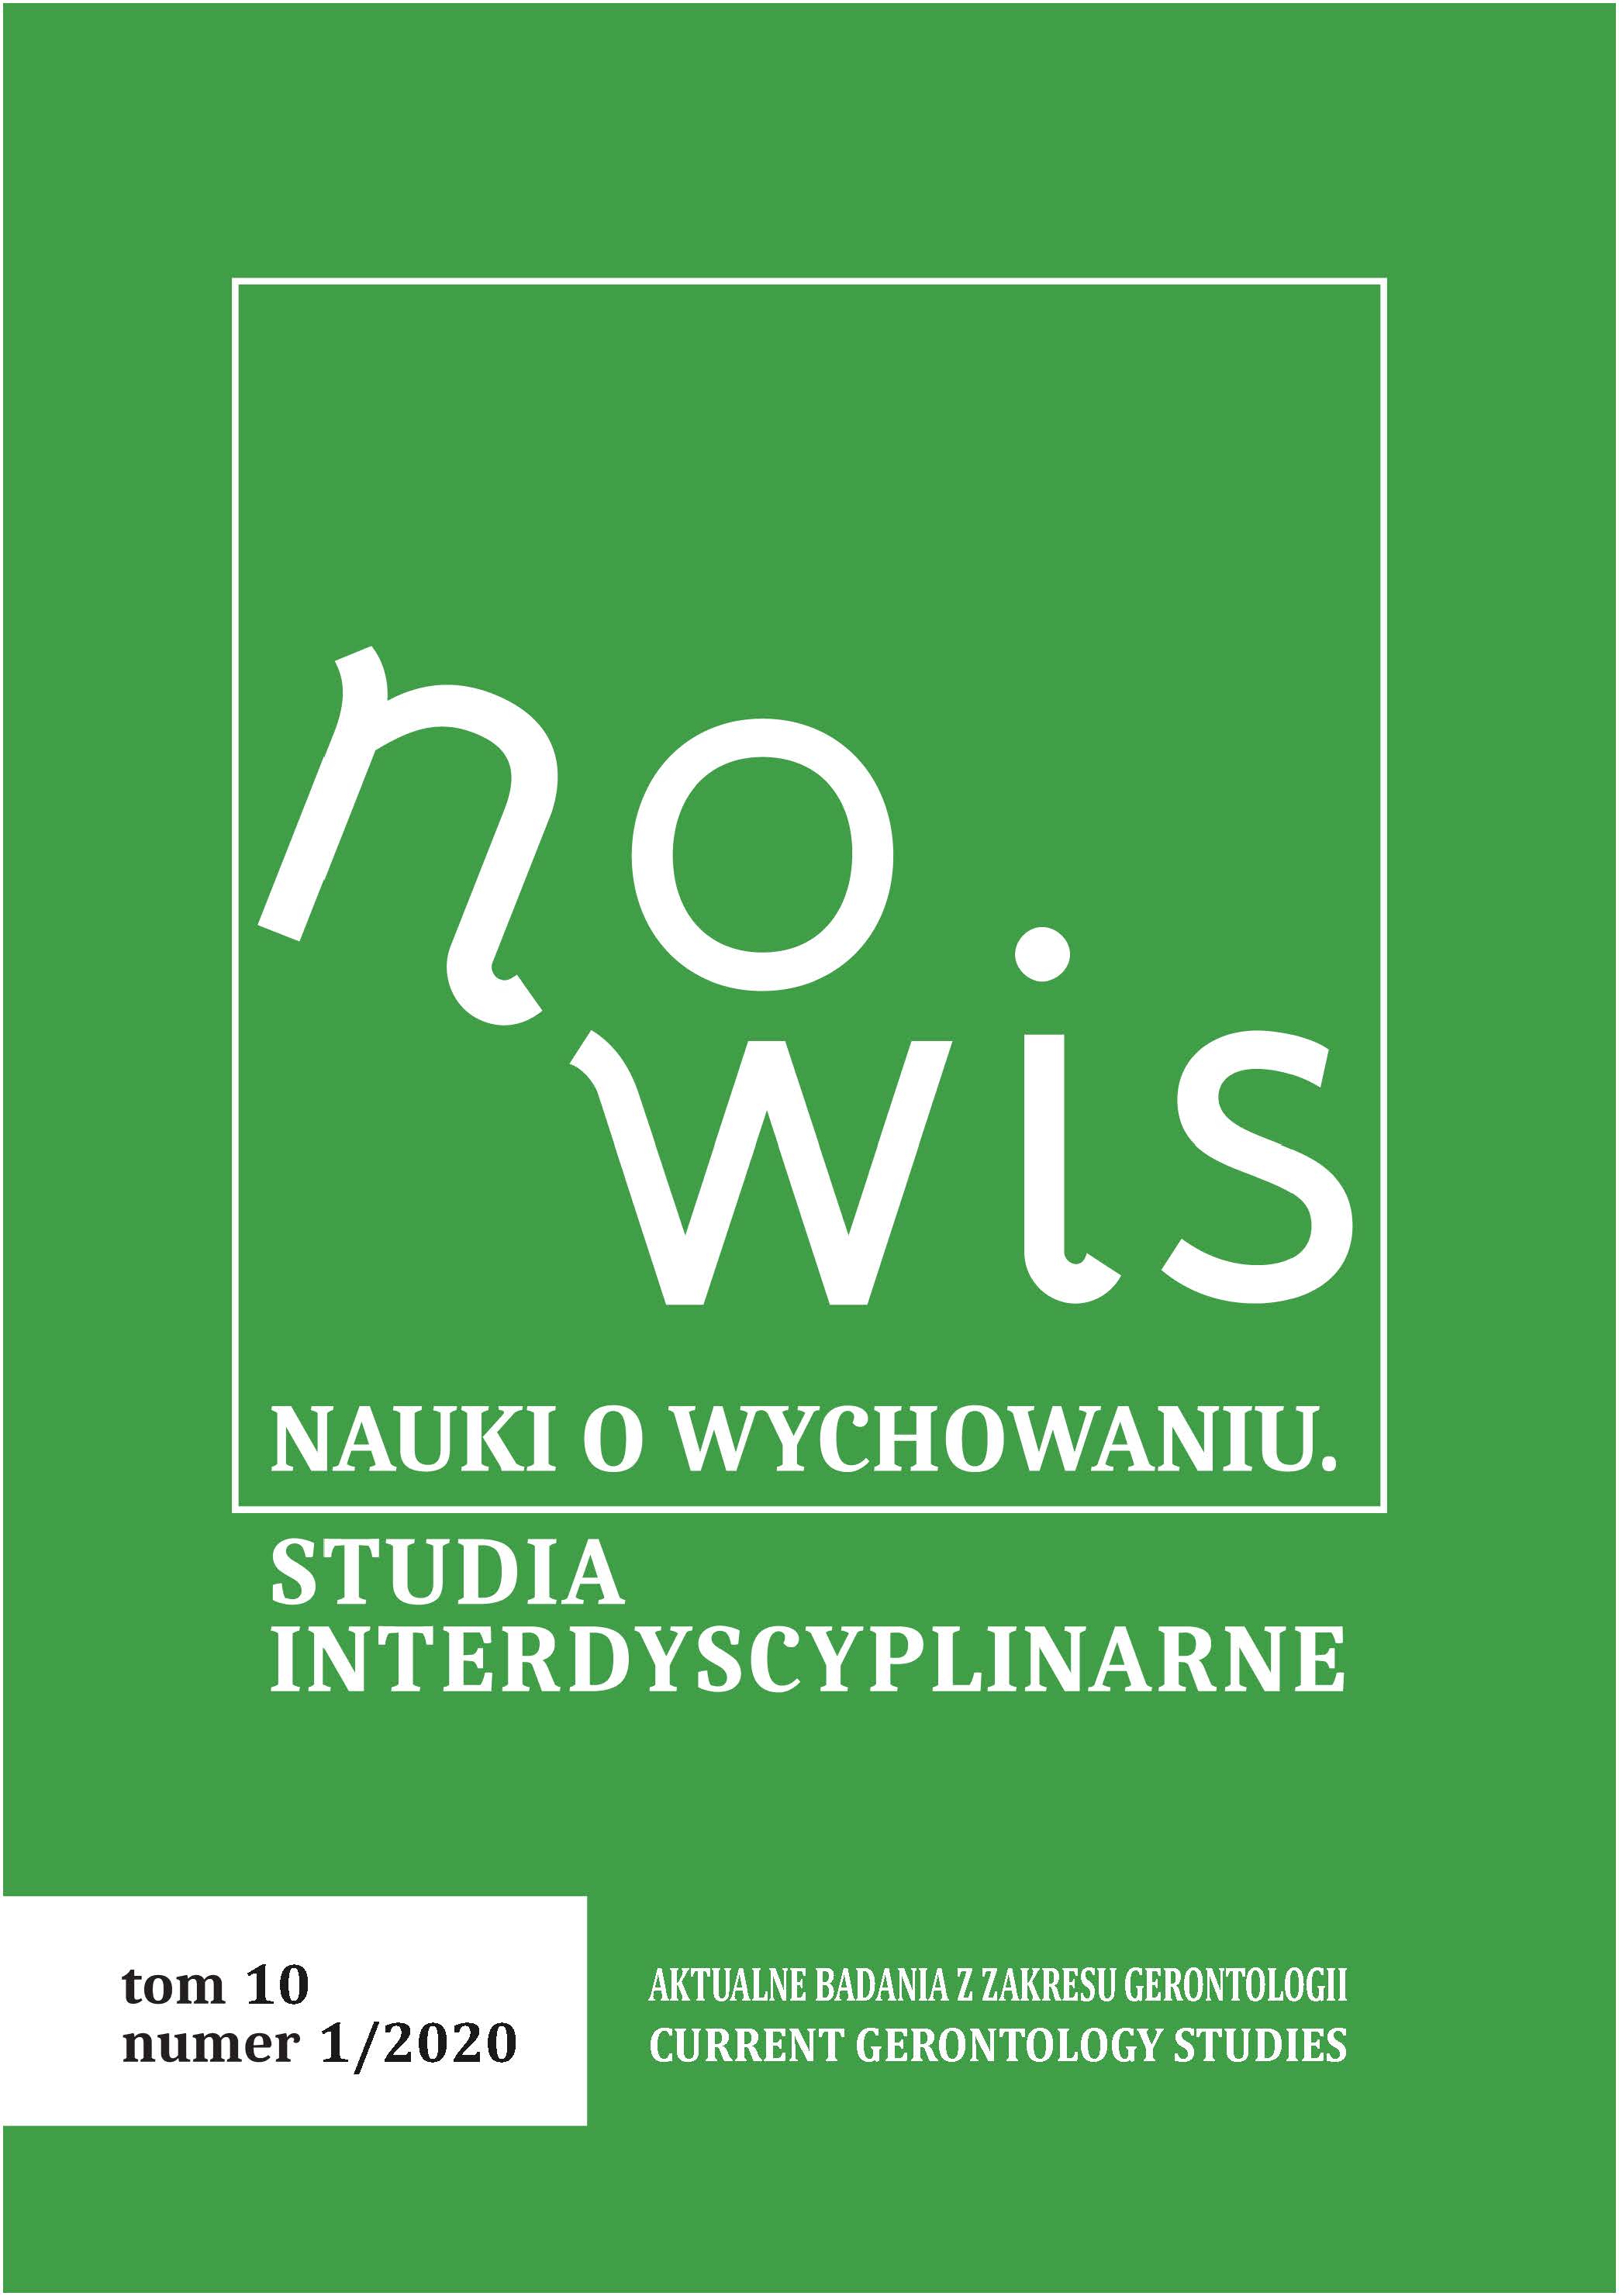 Towards an Environment Supporting the Healthy, Independent and Self-Reliant Life of Elderly People in the Region of Łódź Cover Image